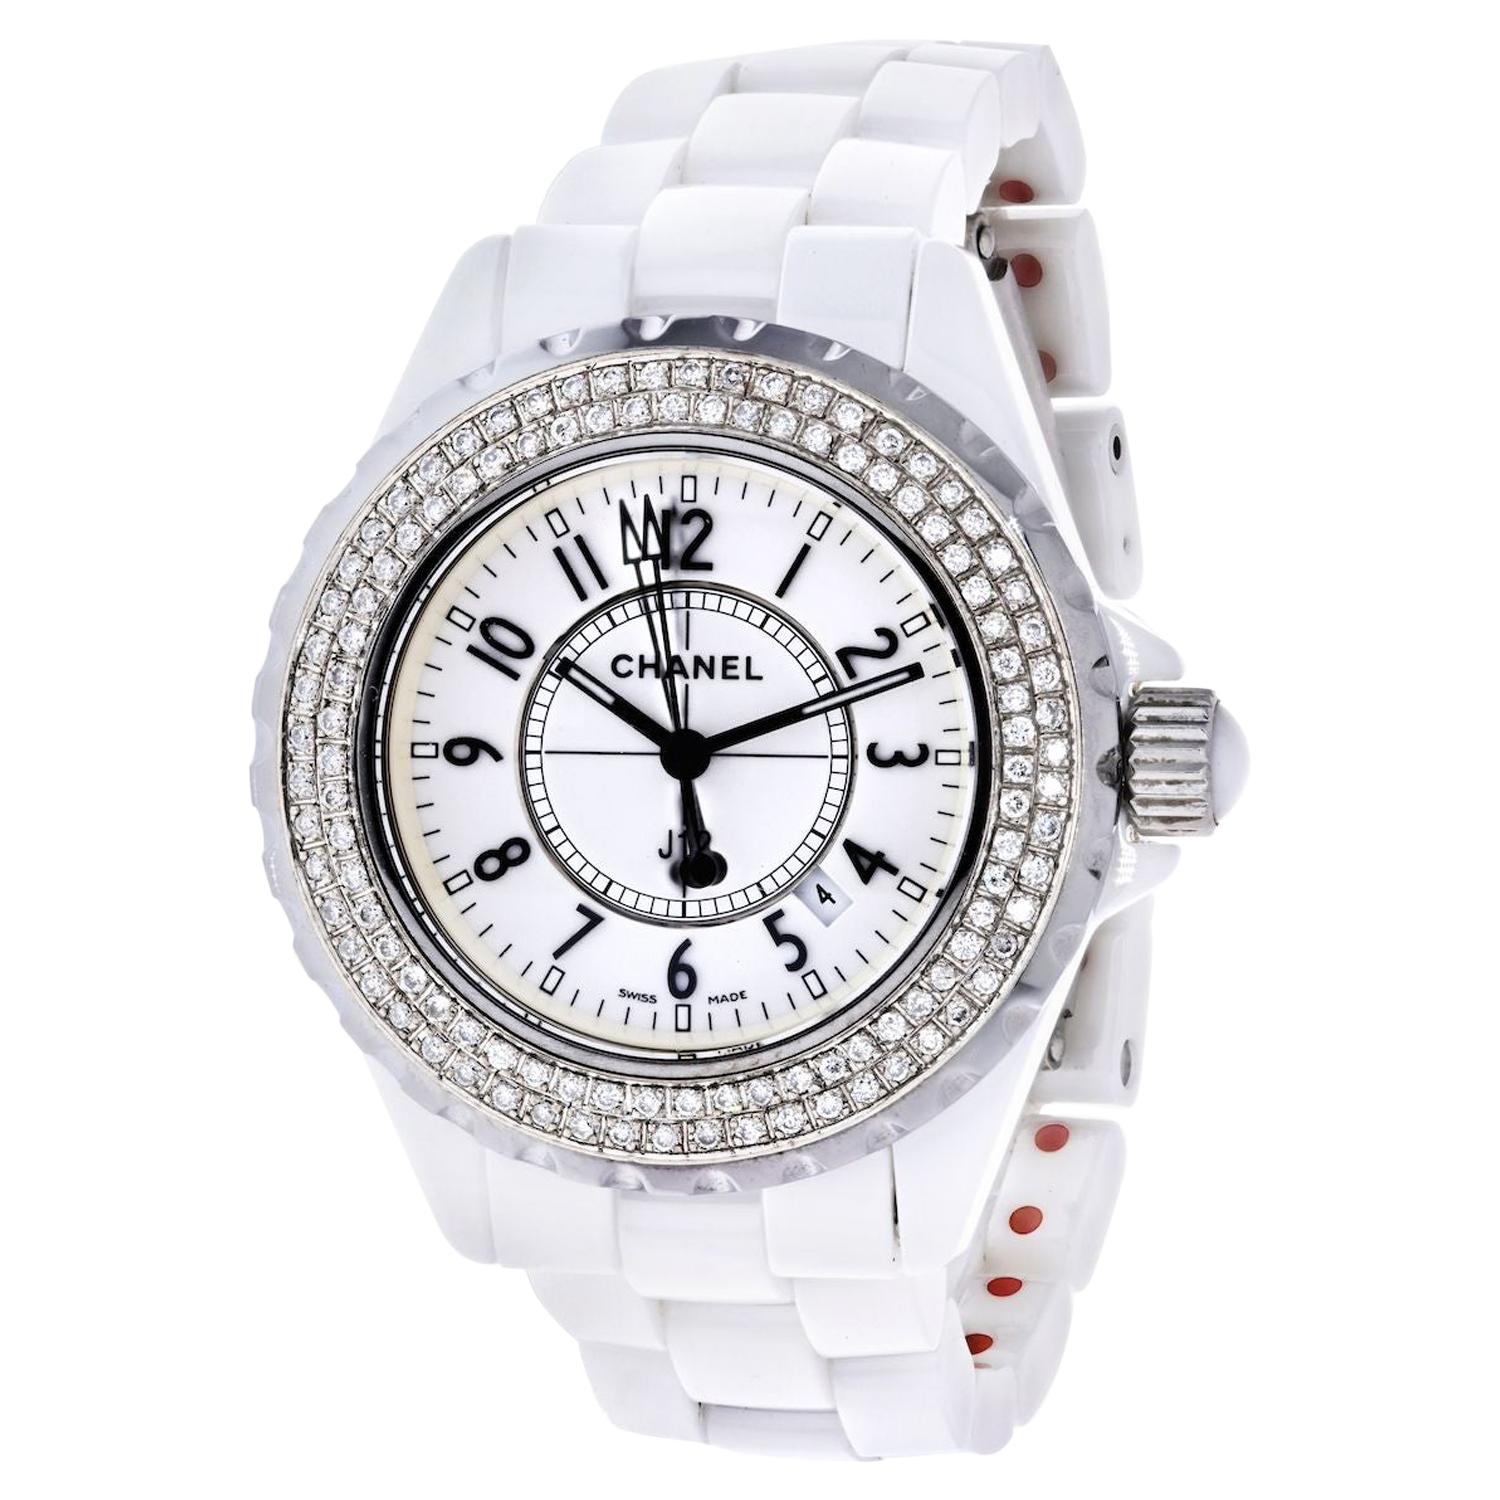 Chanel Stainless Steel J12 White Ceramic Watch